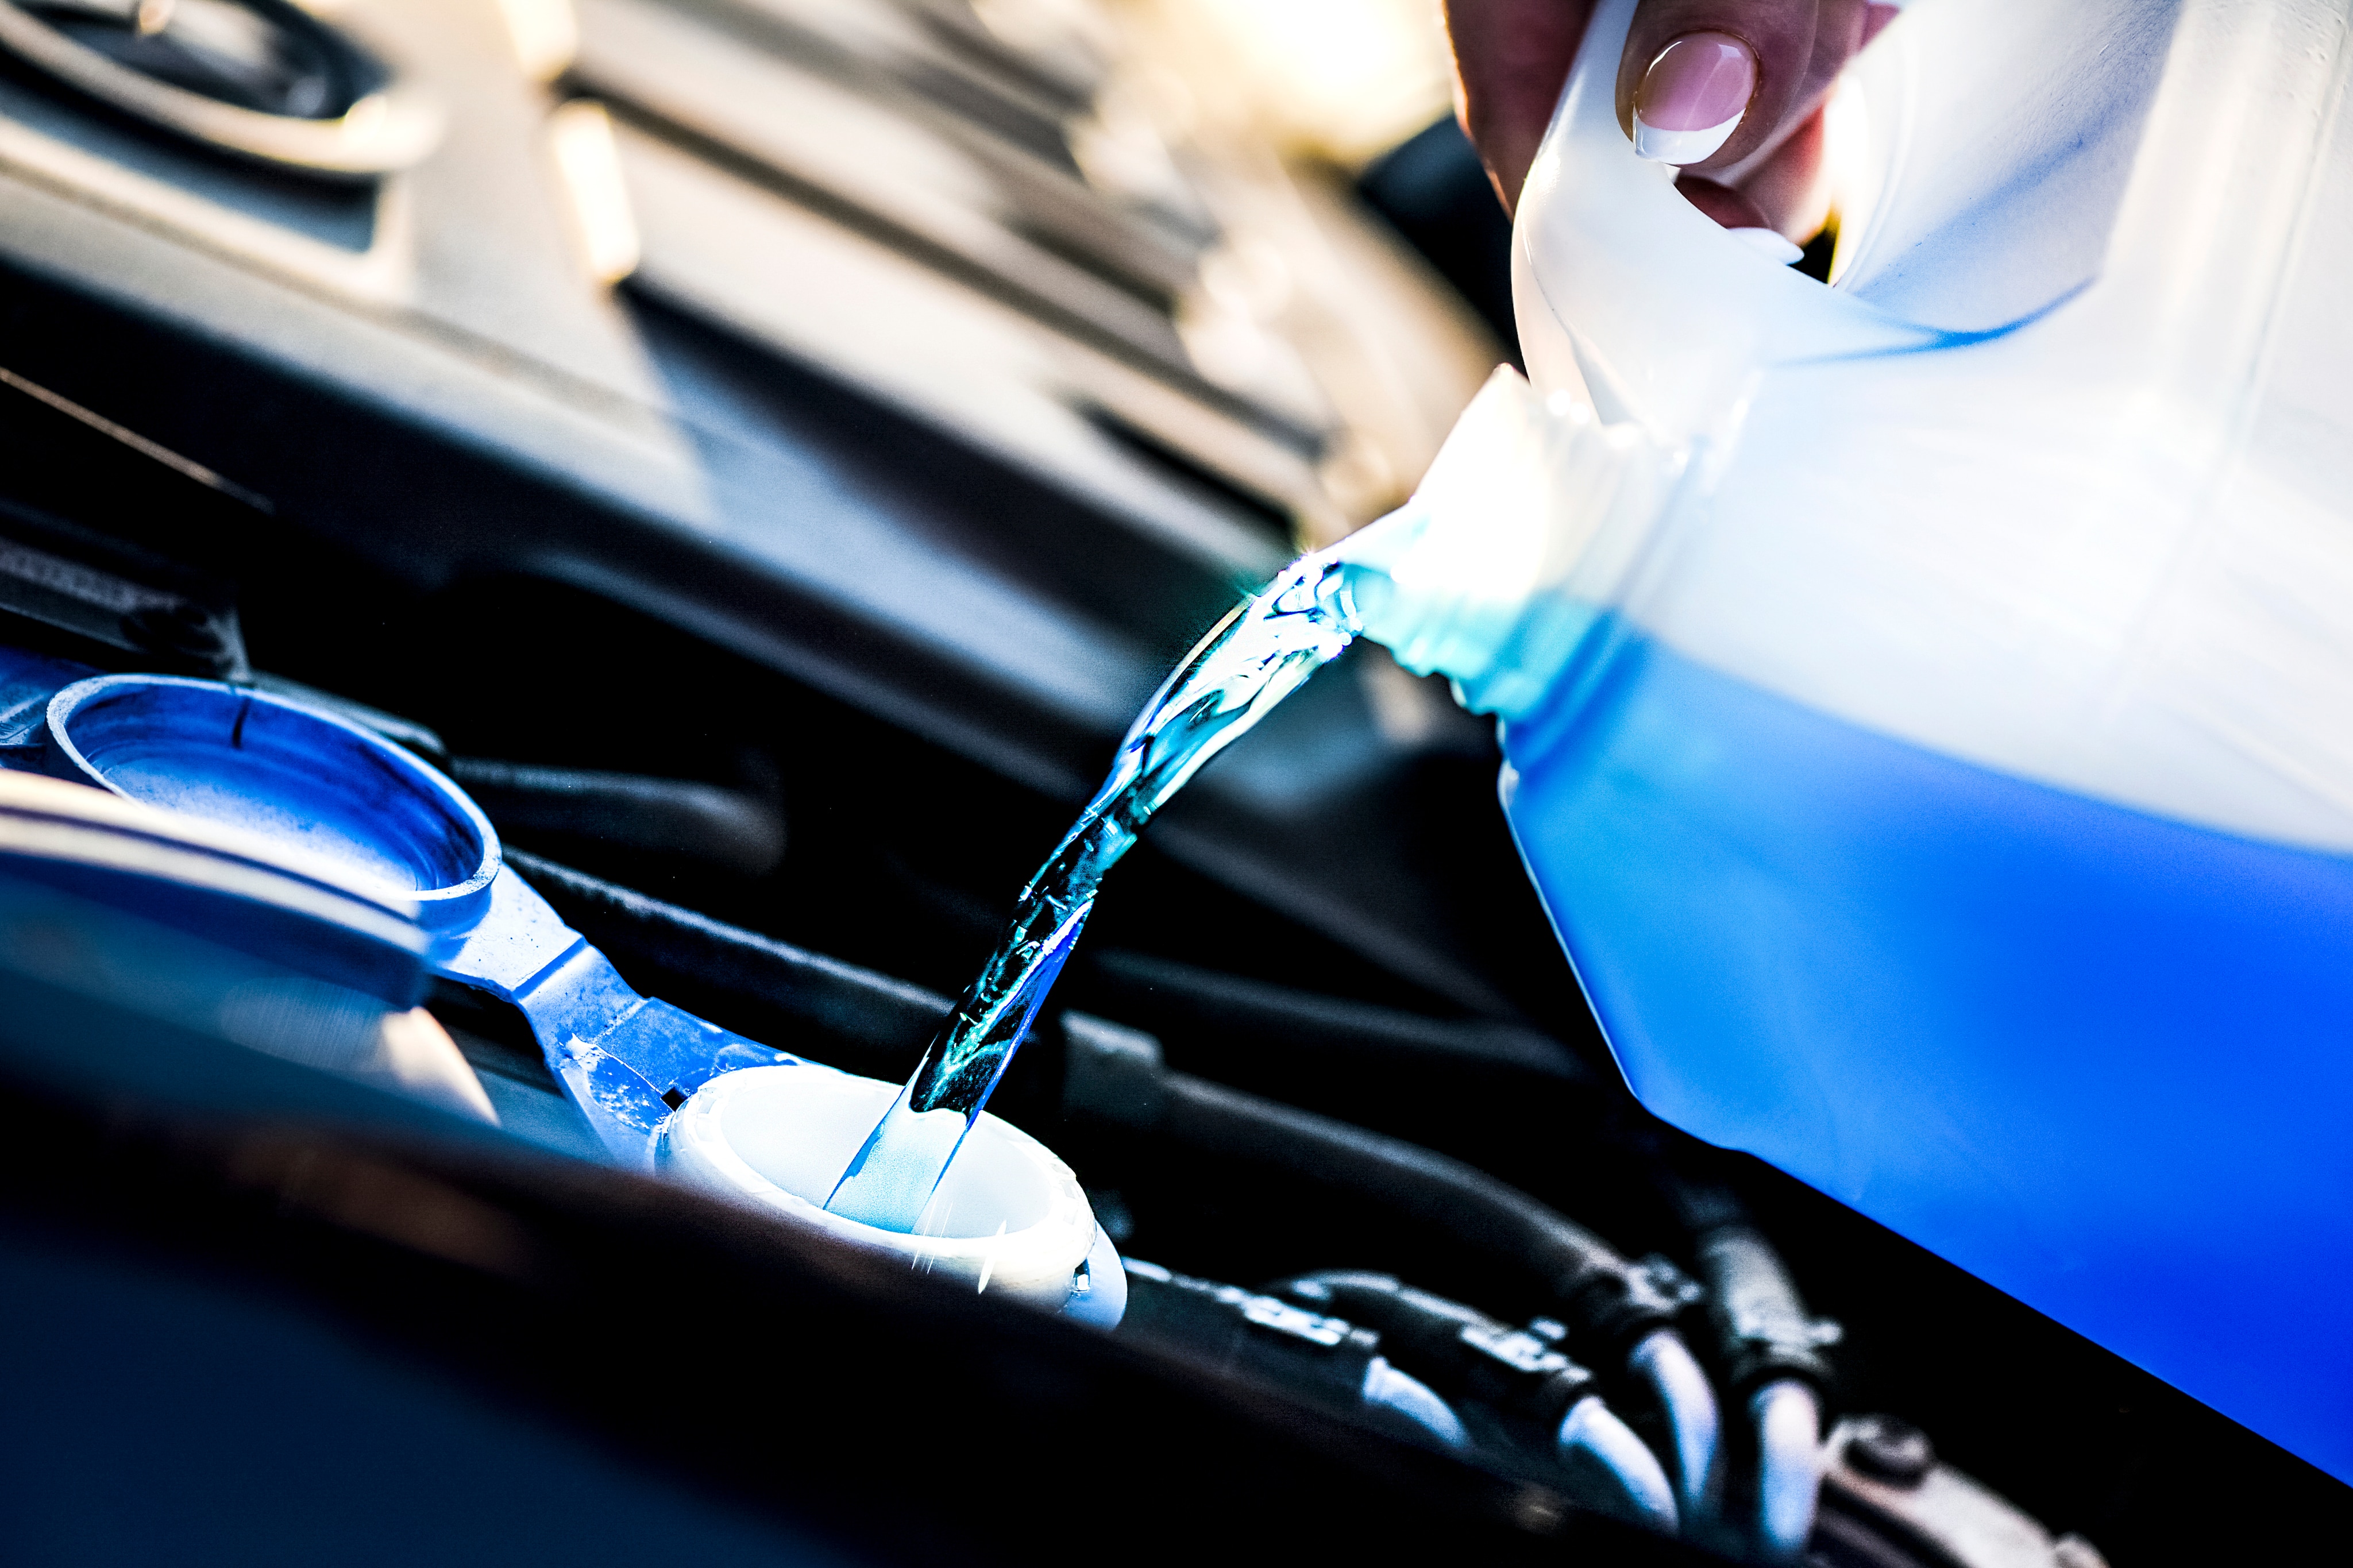 Car Fluid Being Topped Up